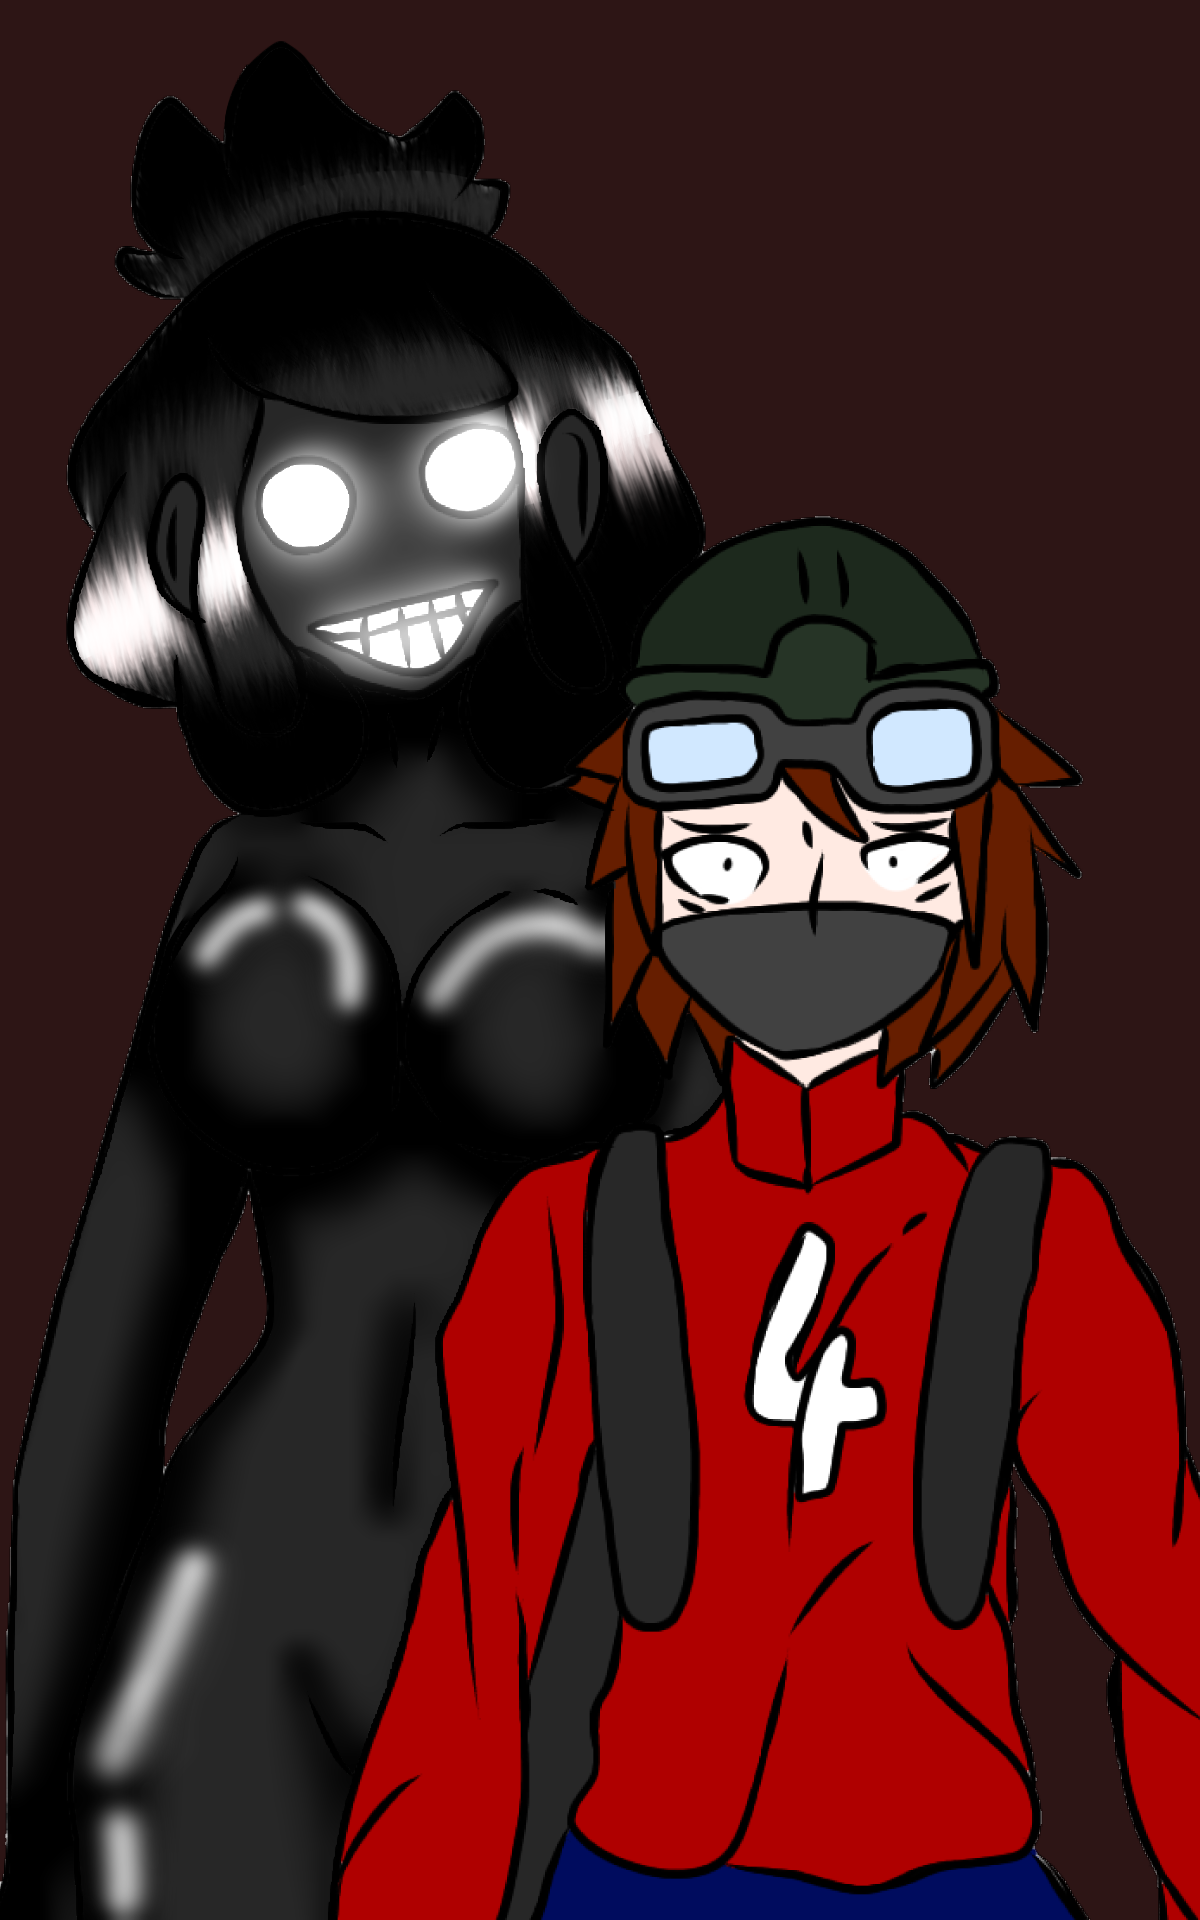 Scp 99999 One Armed Lady by mikuthesinger on DeviantArt